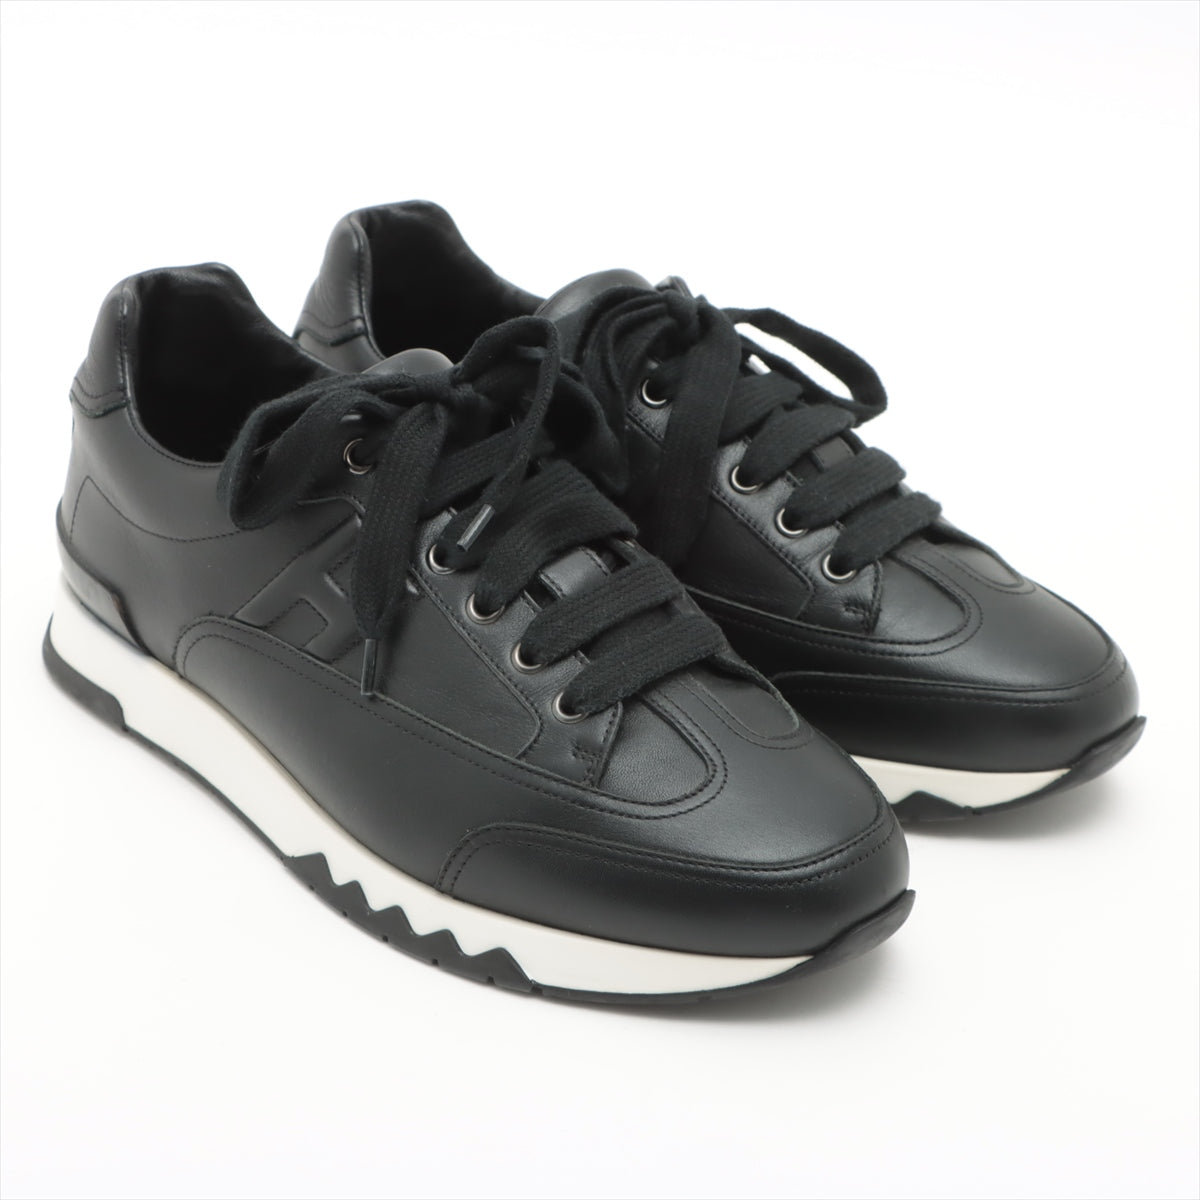 Hermès trails Leather Sneakers 40 Men's Black × White Is there a replacement string Dirt on the midsole There is a thread on the upper